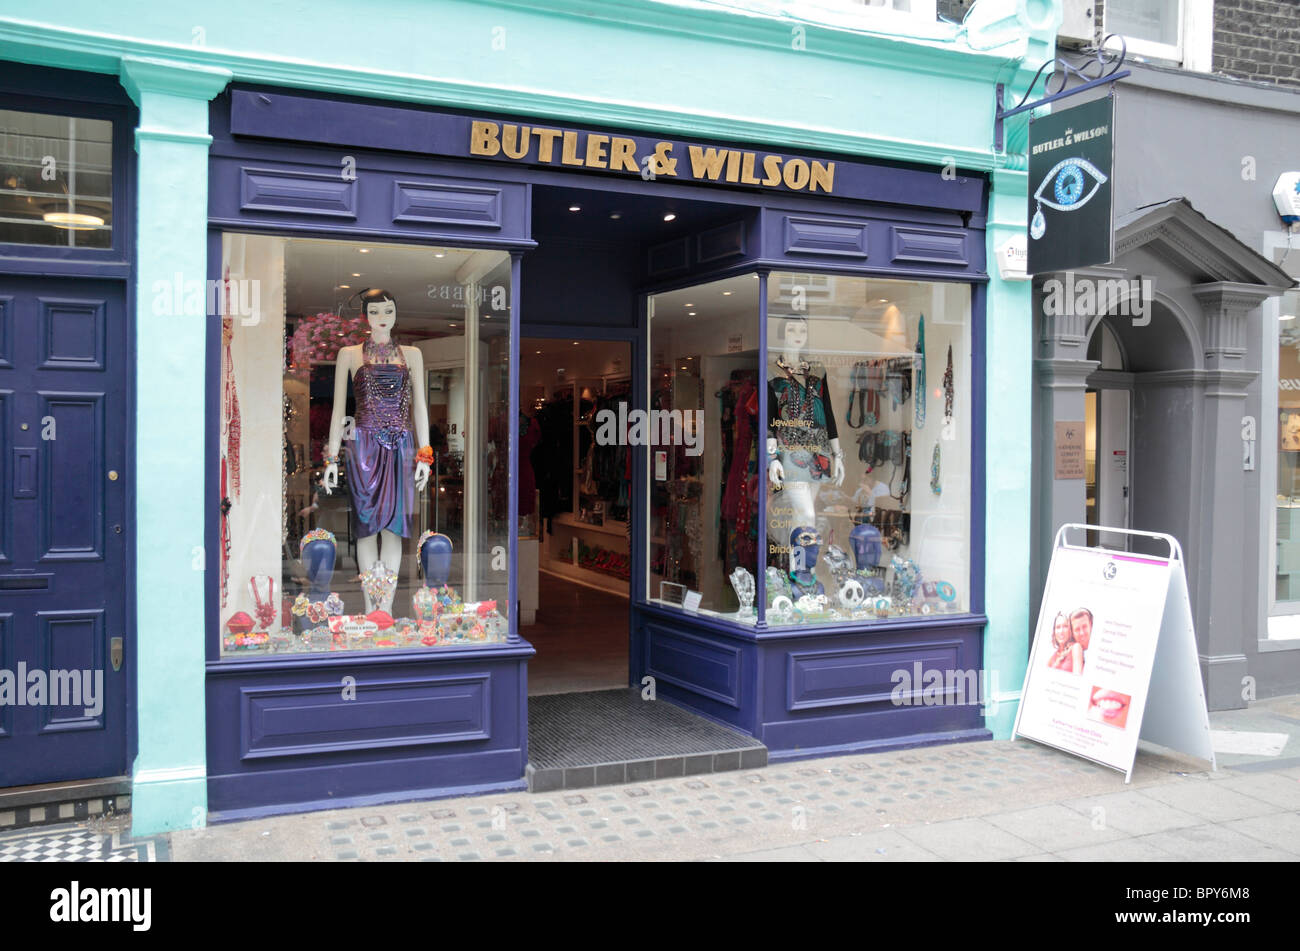 The shop front of the Butler & Wilson, maker of fine handmade jewelry, on South Molton St, London, UK Stock Photo